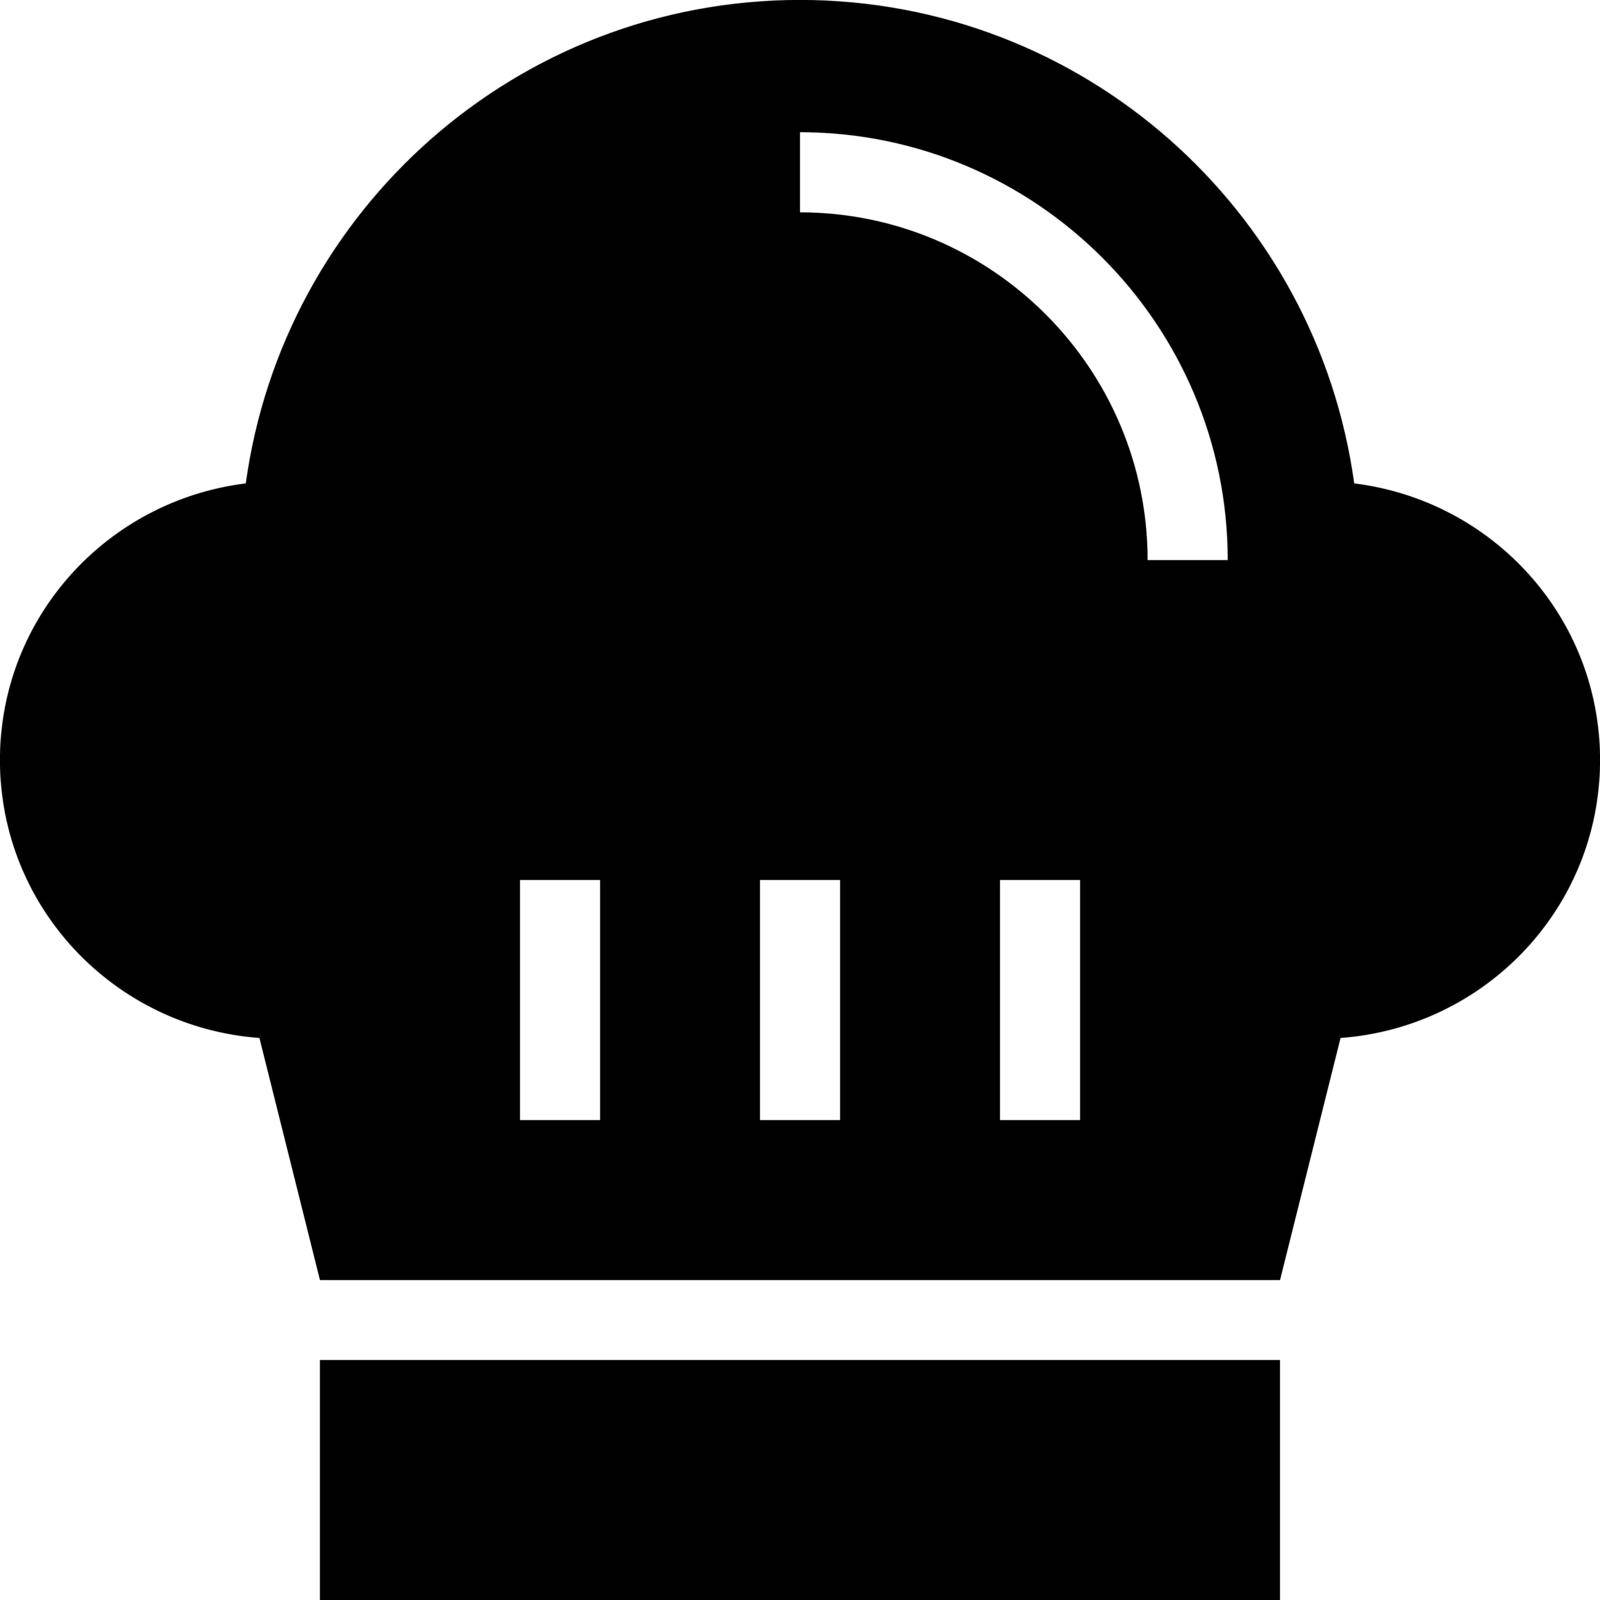 chef hat icon glyph by dhtgip